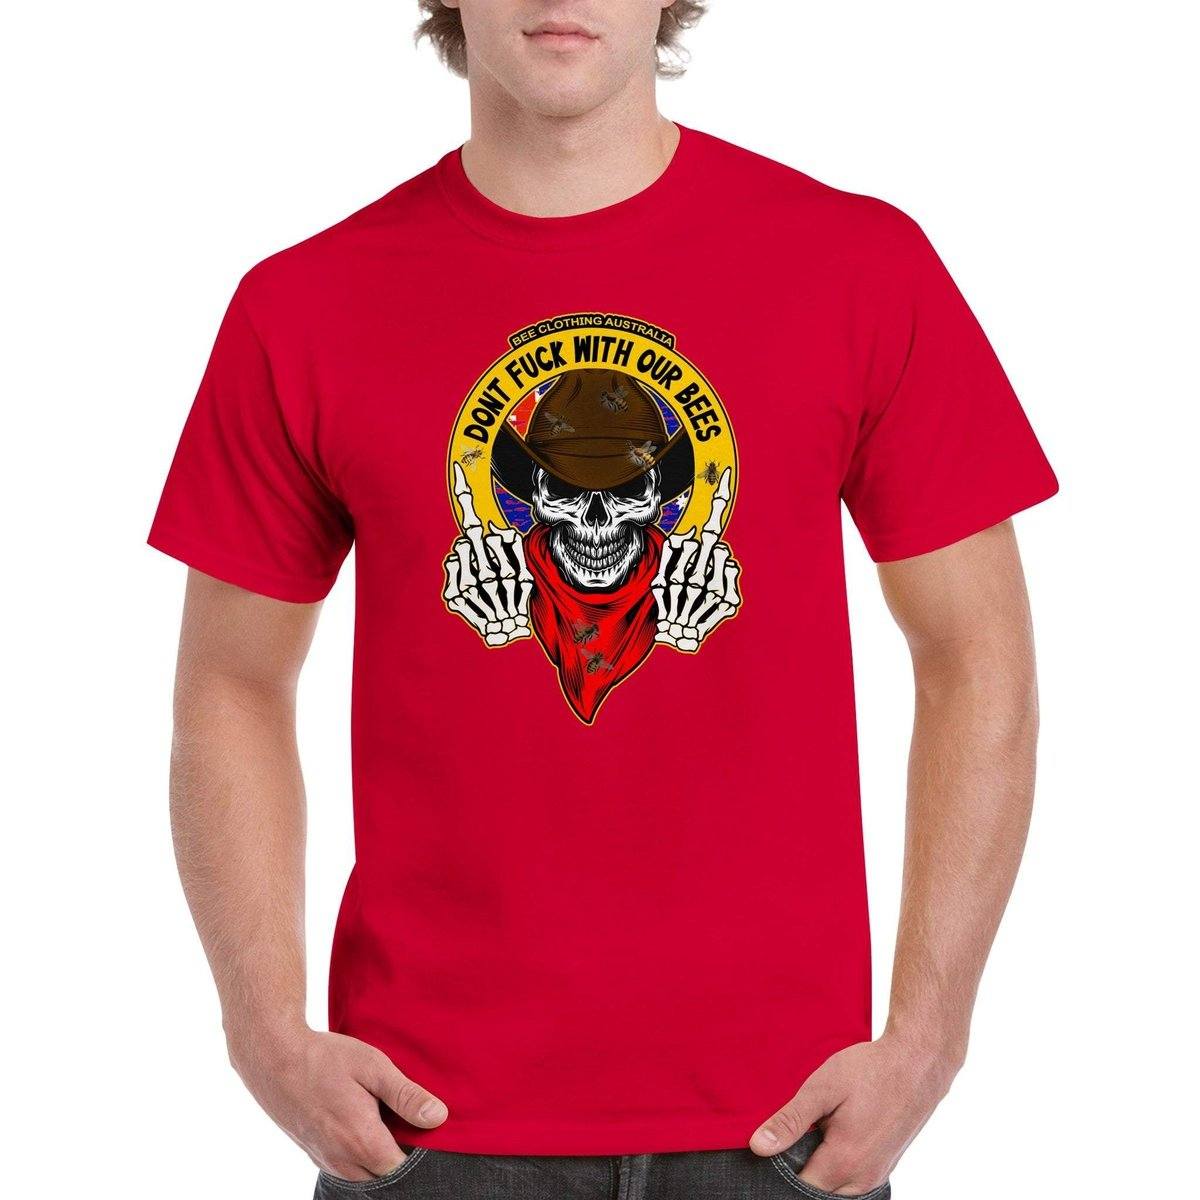 Dont Fuck With Our Bees T-Shirt - beekeeper Tshirt - Unisex Crewneck T-shirt Australia Online Color Red / S